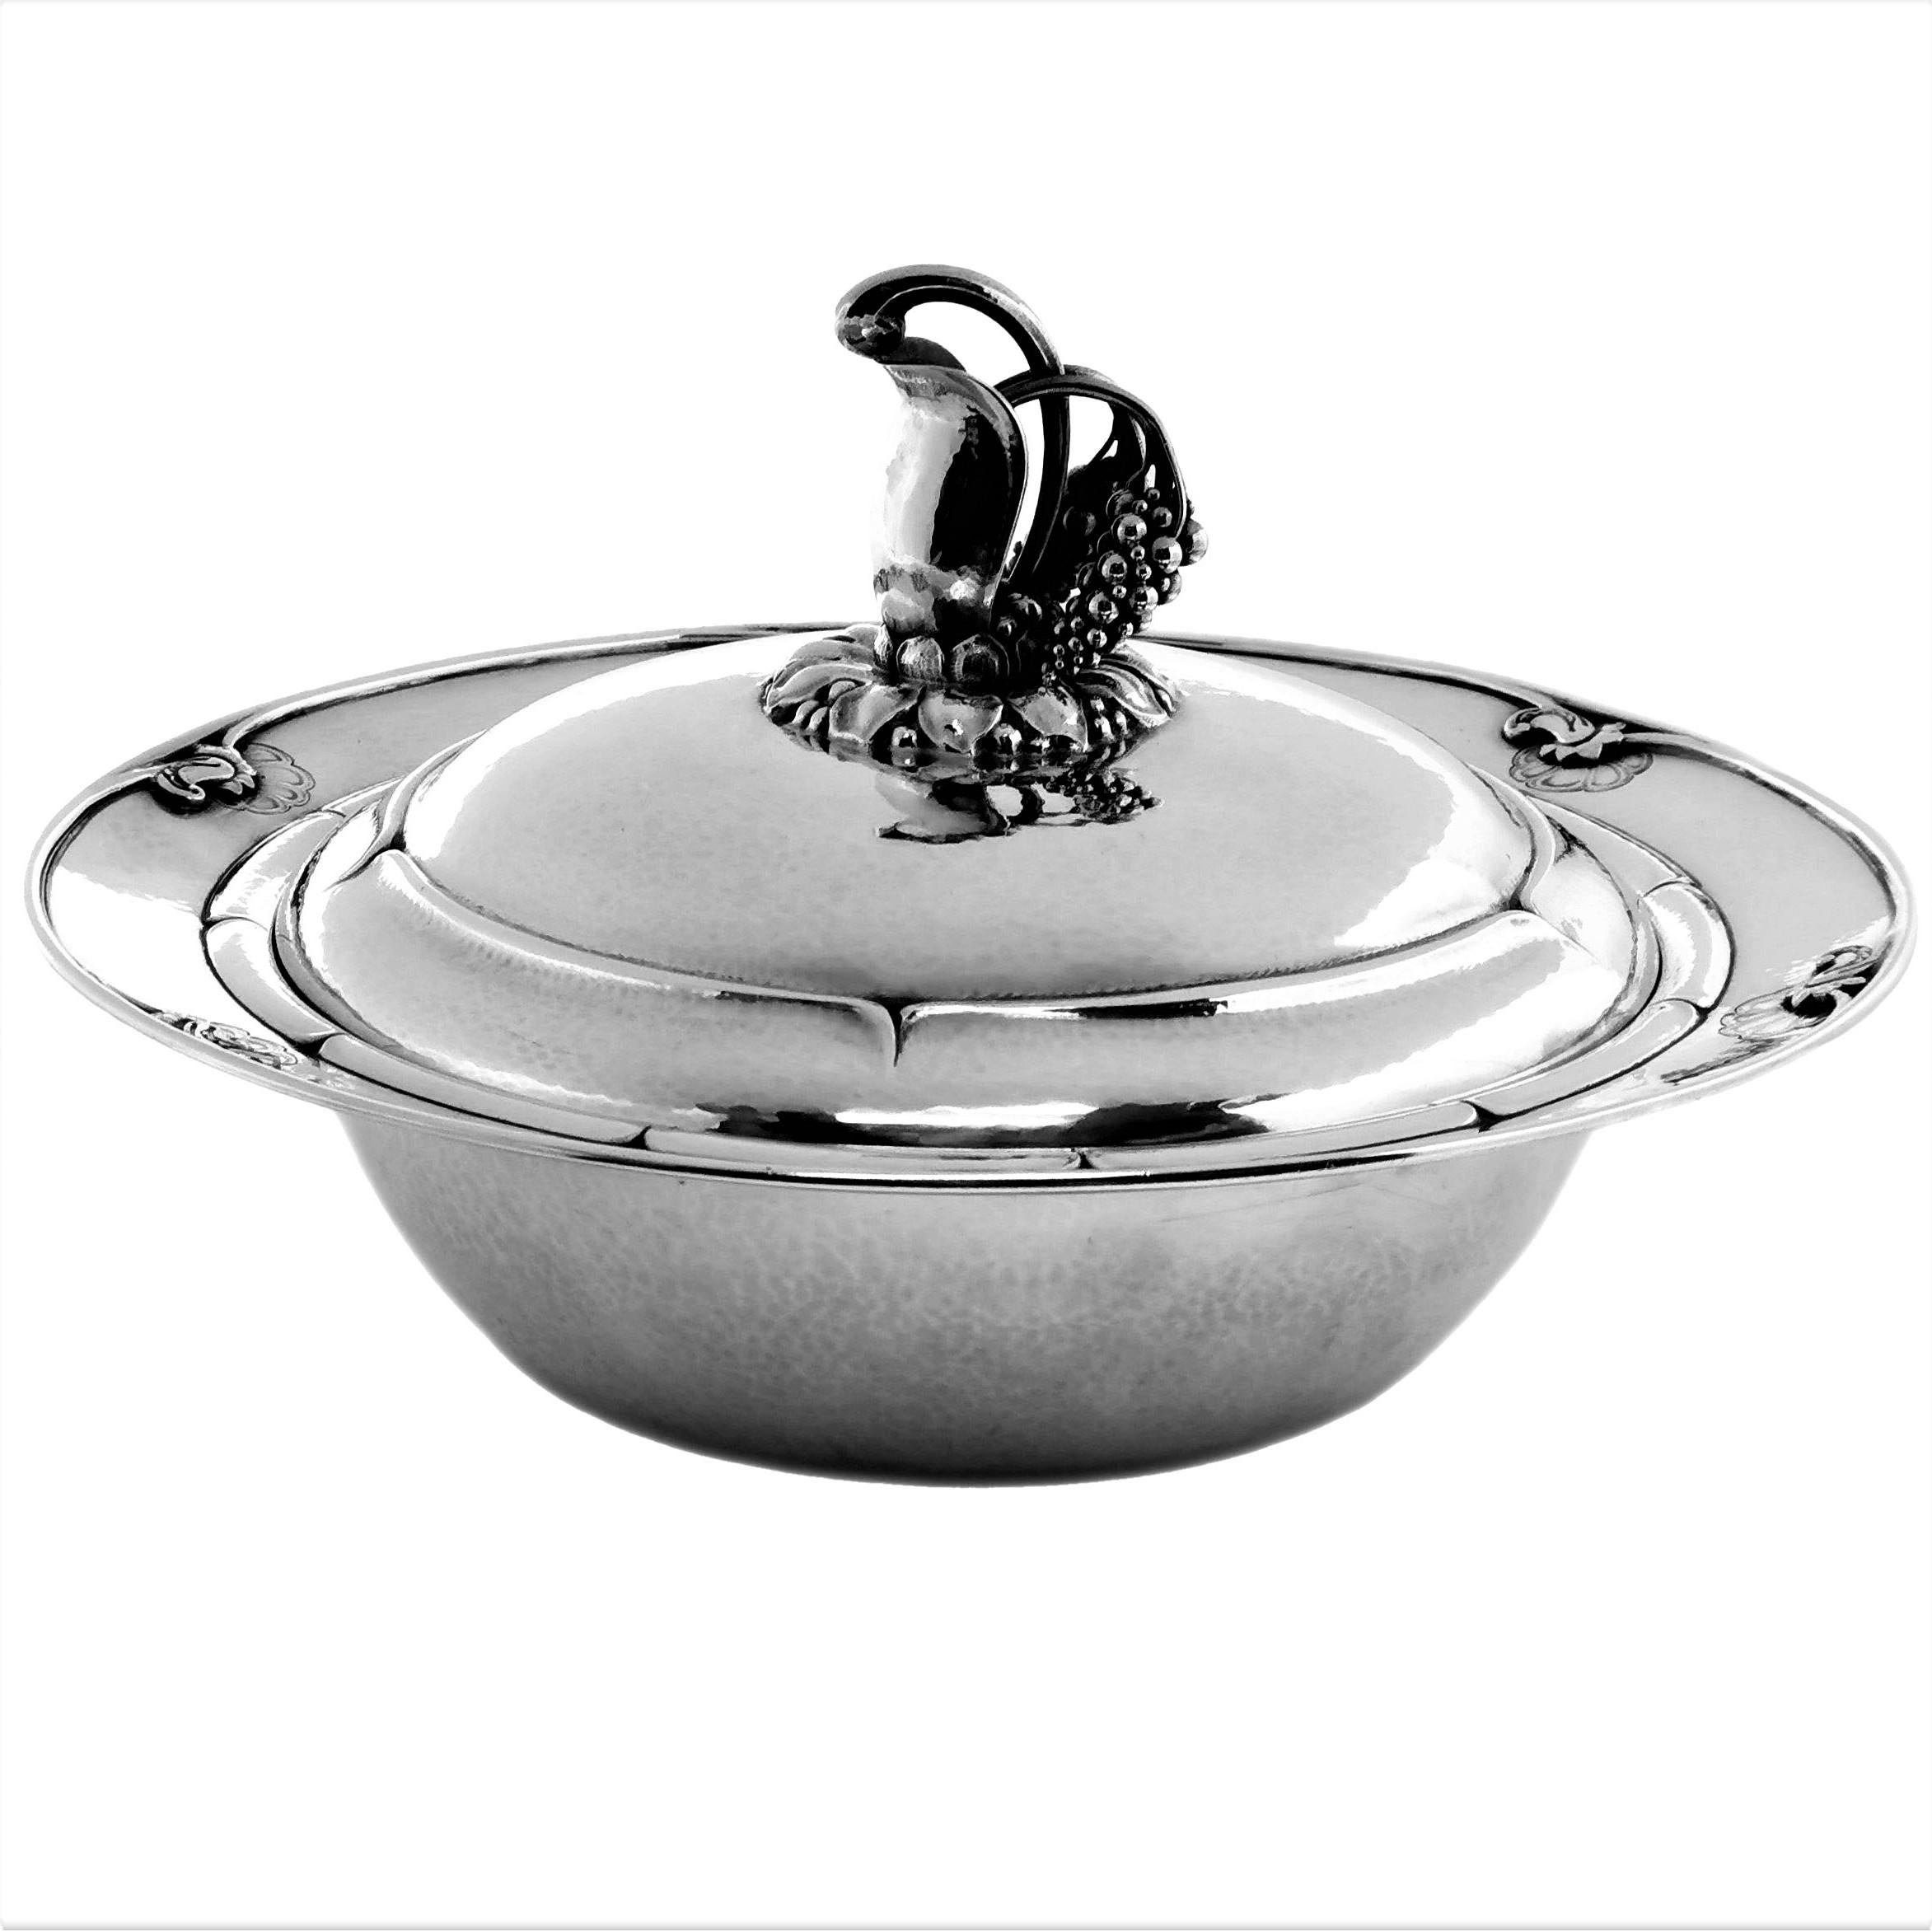 A magnificent Danish Lidded Silver Vegetable Dish with a removable divider insert by Georg Jensen. The Rim of the Tureen has a repeating stylised floral pattern around the rim and the lid is embellished with an impressive finial. The entire dish has